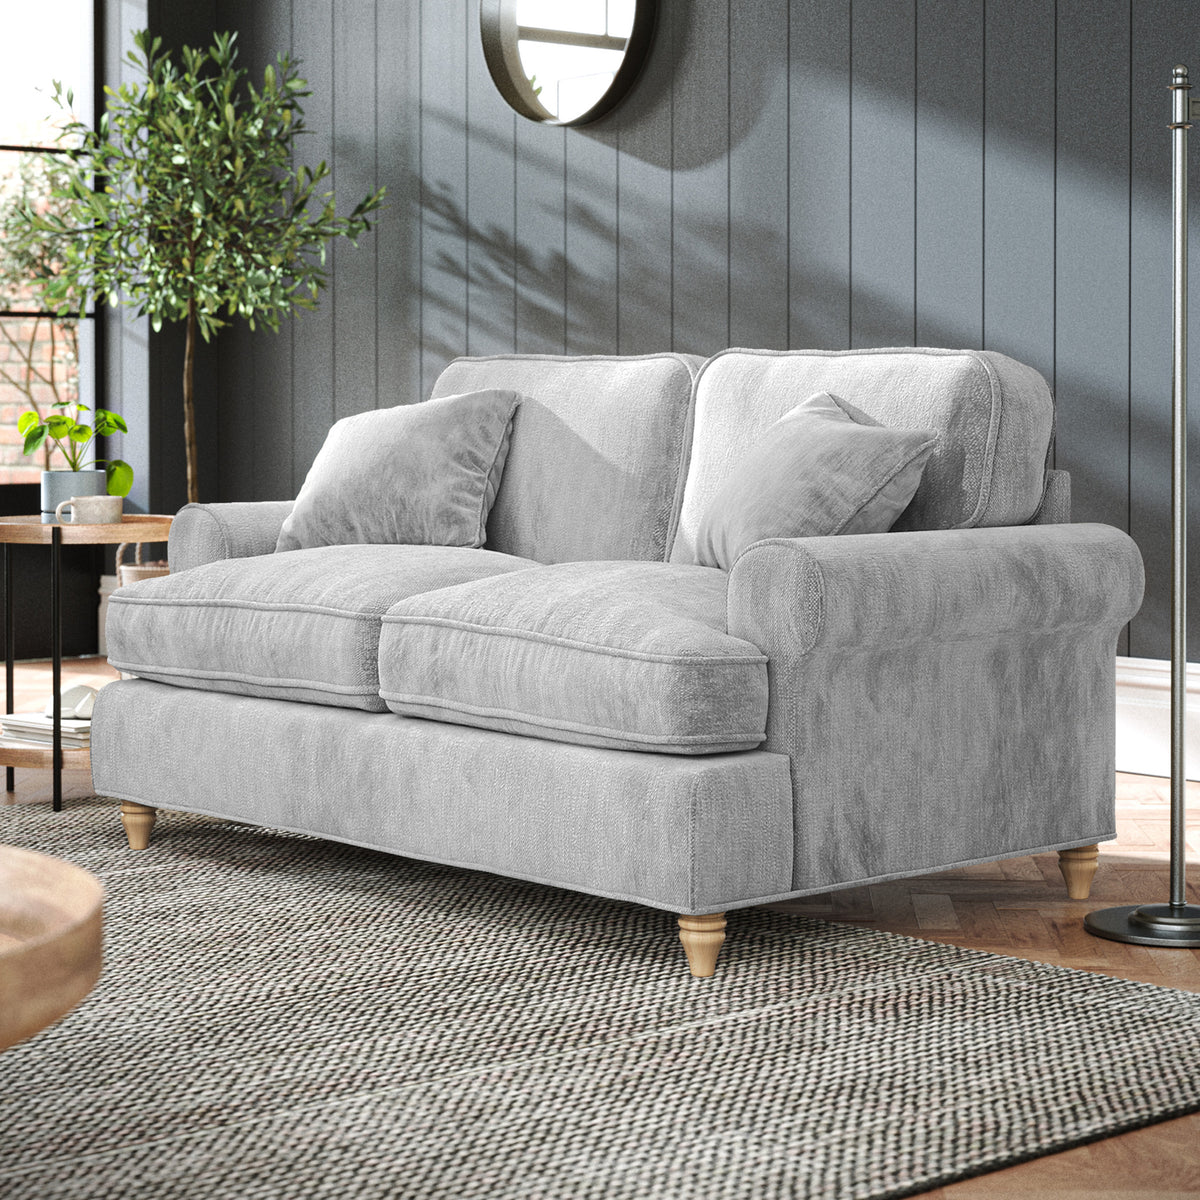 Alfie Ice Grey 2 Seater Sofa from Roseland Furniture